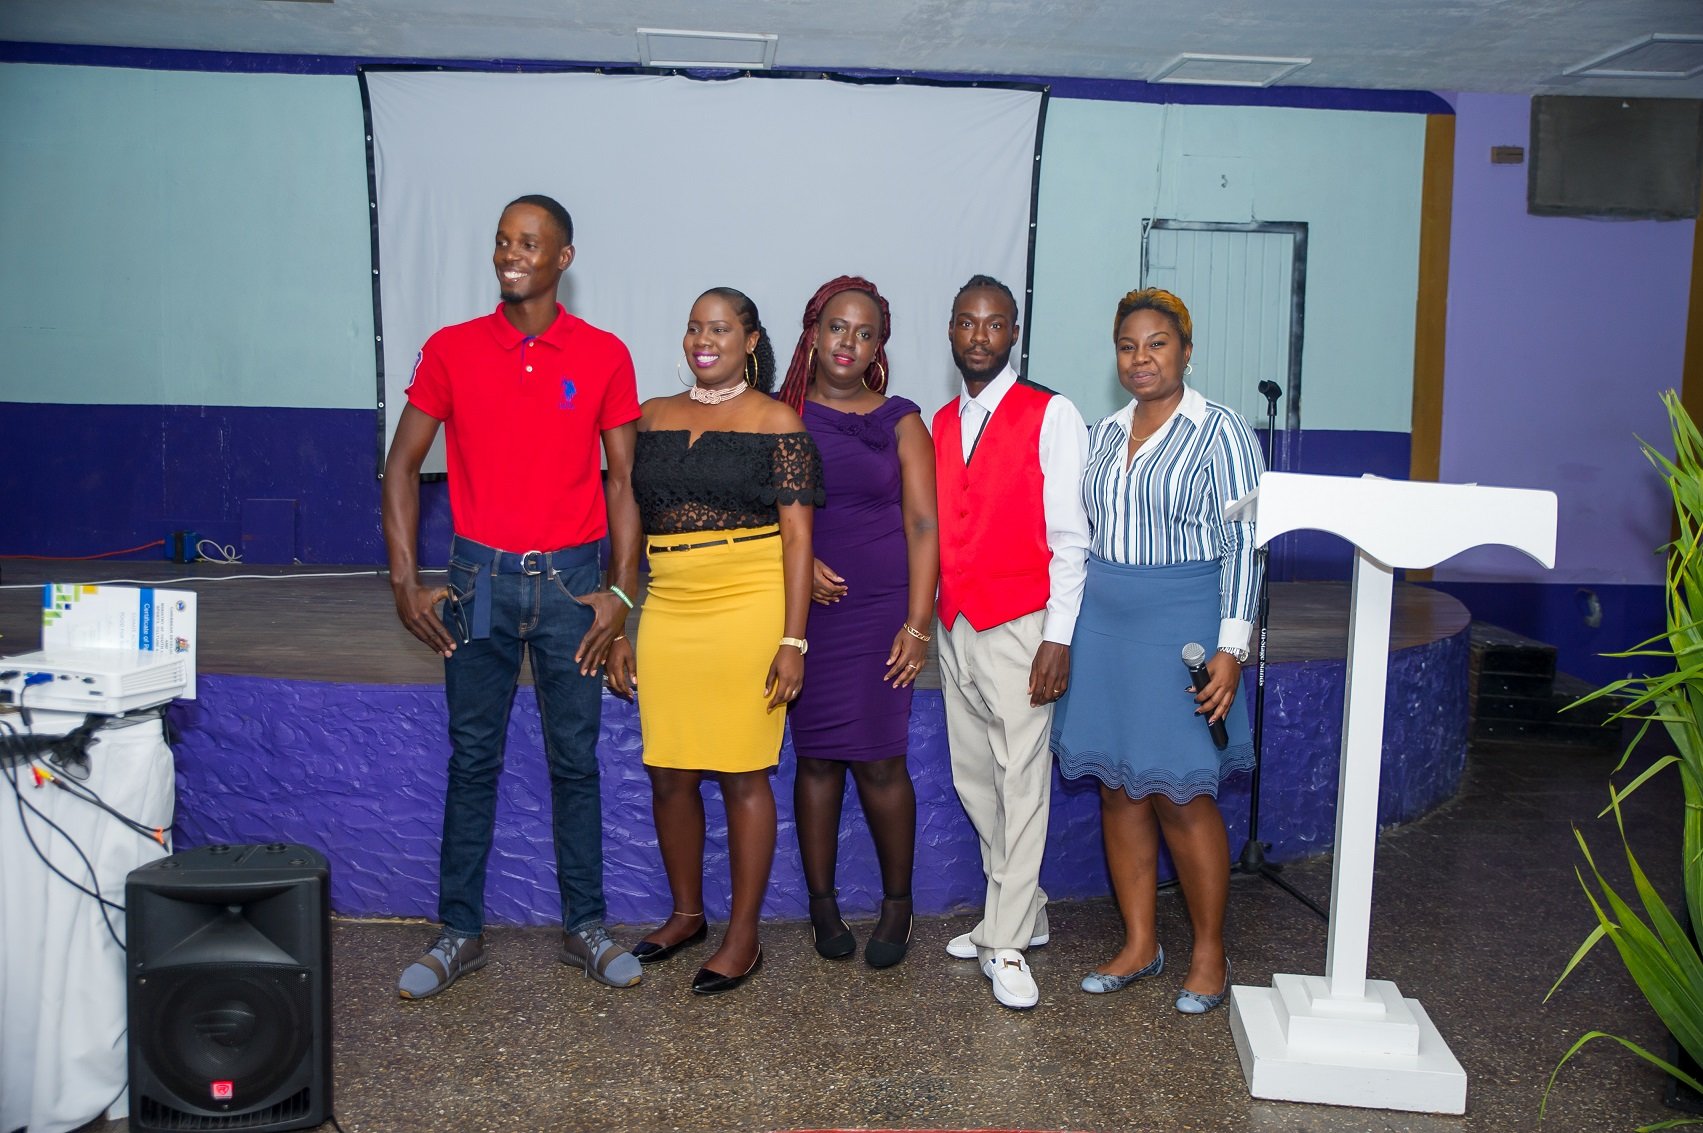 Team Aqua-Refine, with facilitator Tamara Gibson (first from right) after they were announced winners of the VYBZING Bootcamp pitch contest on May 25, 2018.